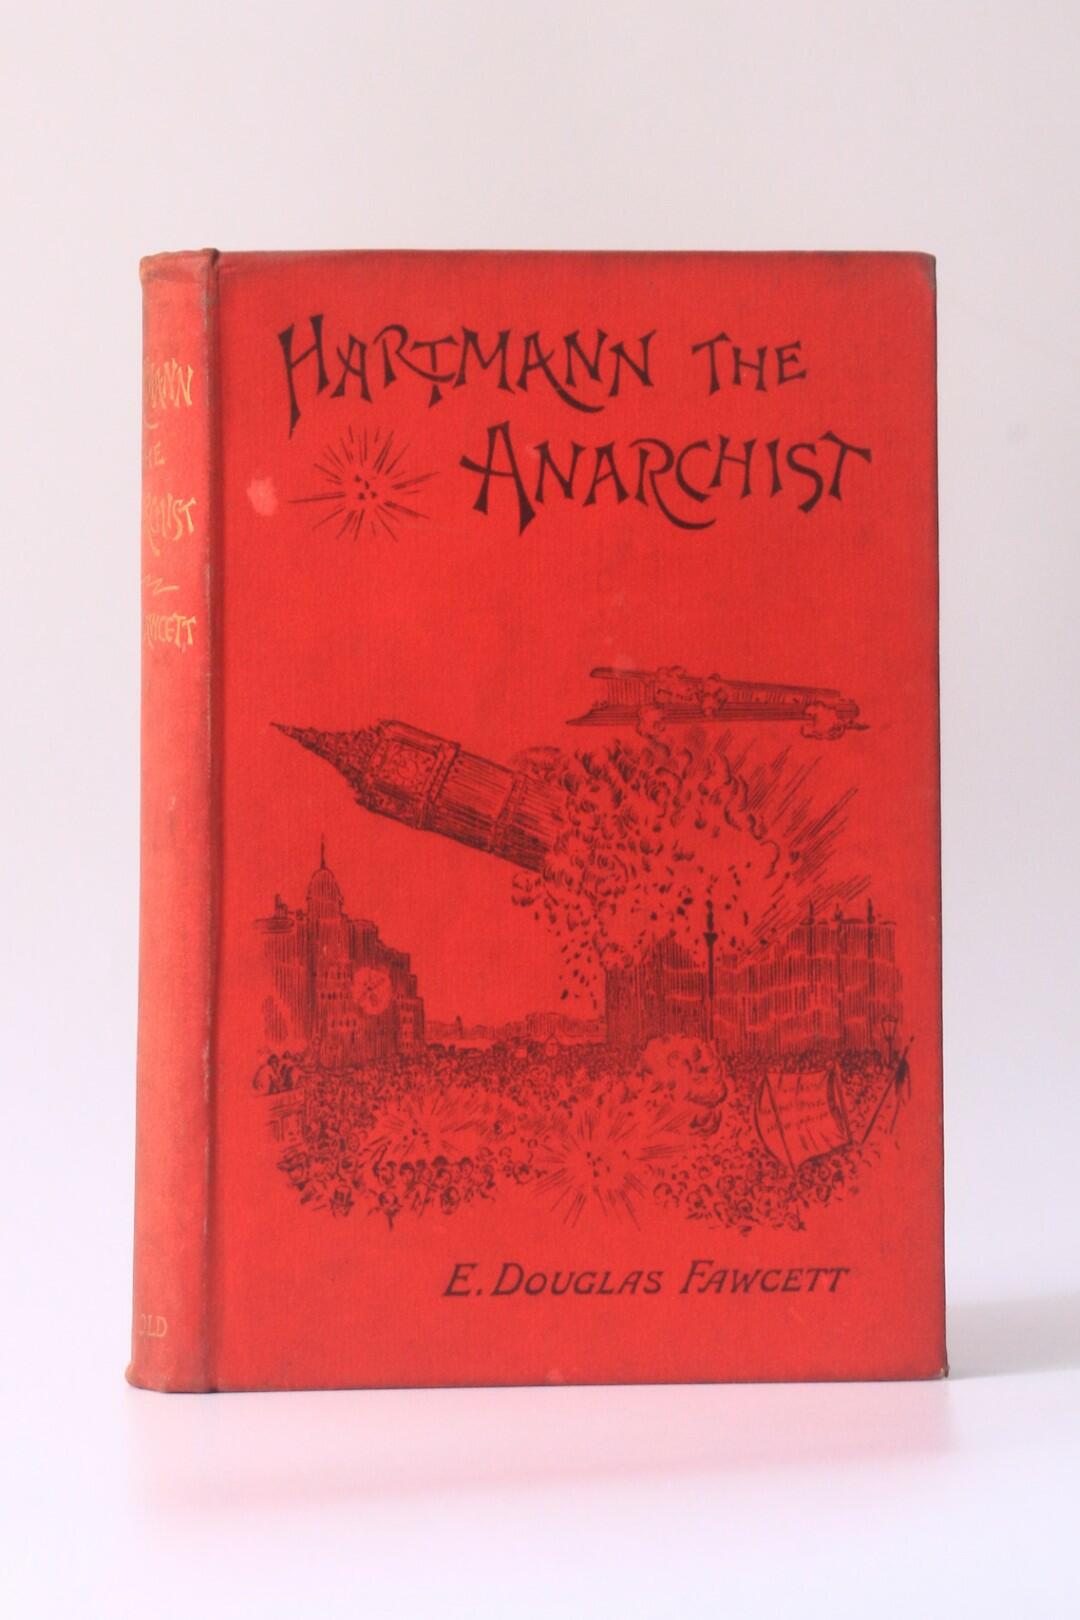 E. Douglas Fawcett - Hartmann the Anarchist; or, The Doom of the Great City - Arnold, 1893, First Edition.